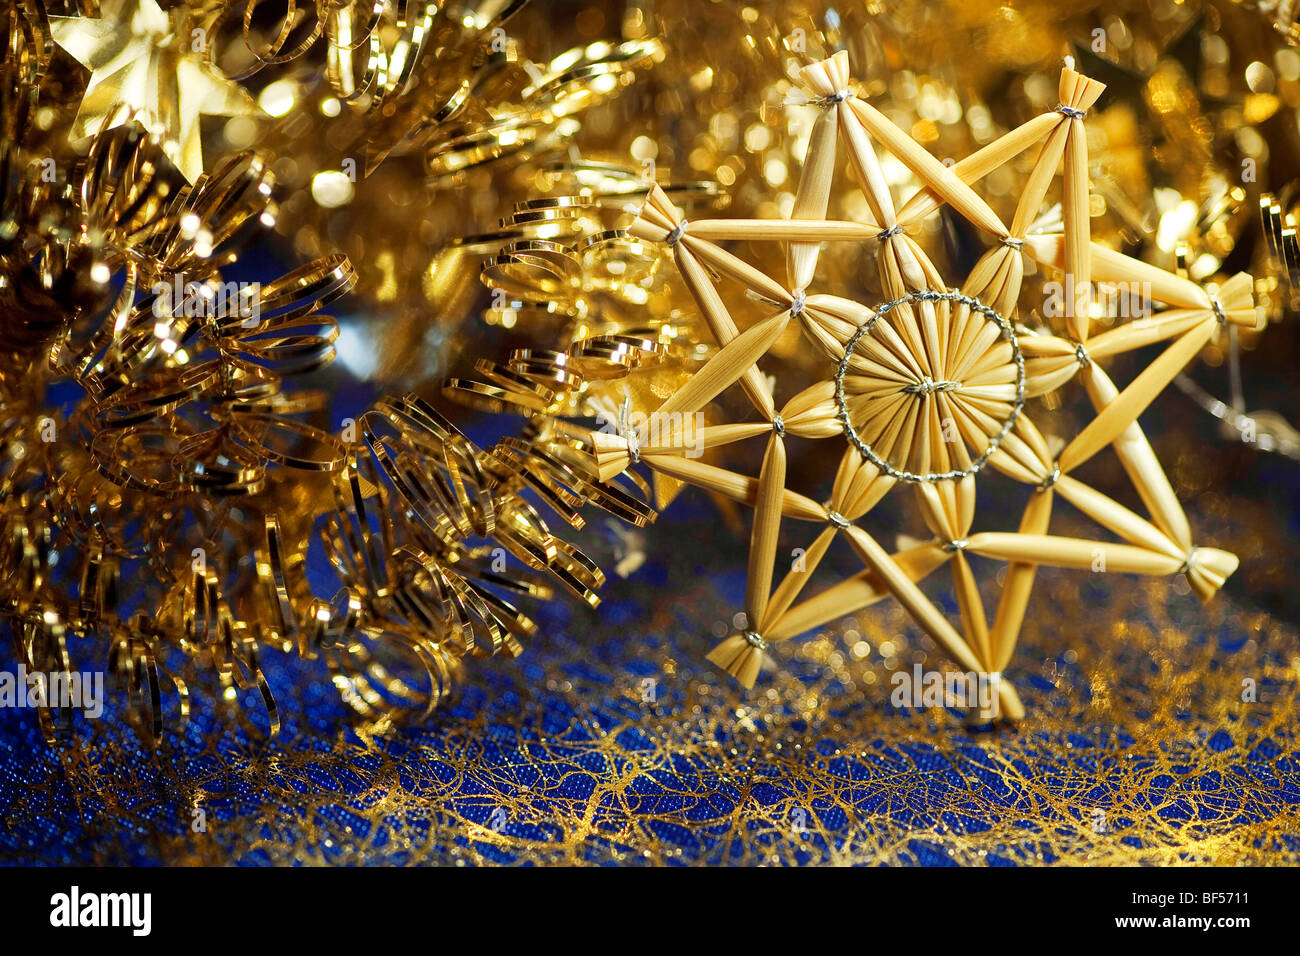 Christmas decorations with a star made of straw Stock Photo